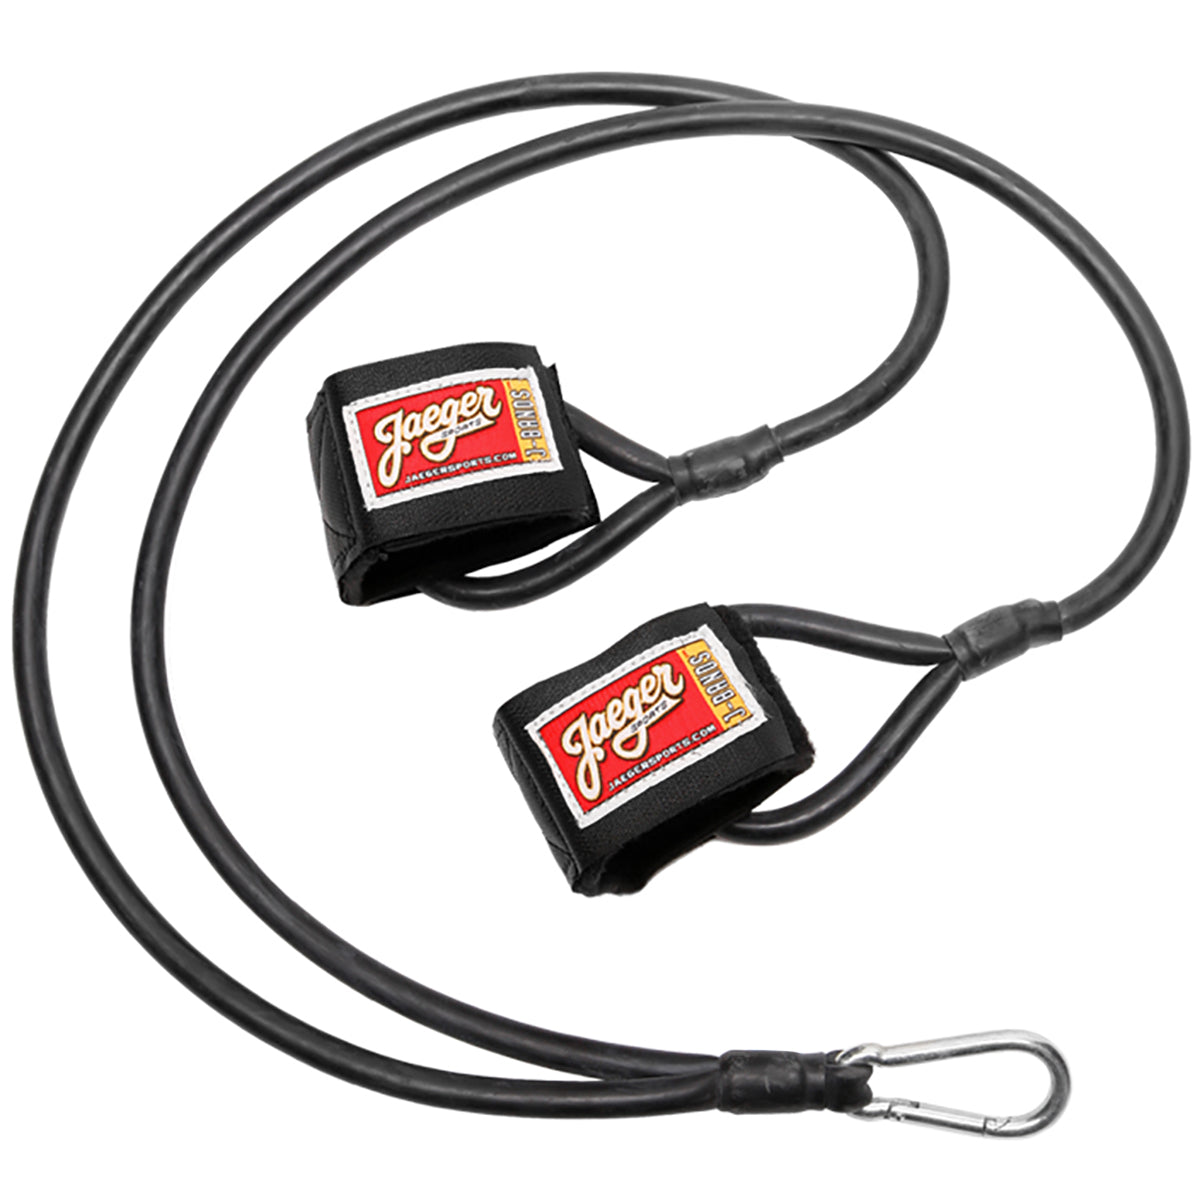 Jaeger Sports J-Bands Baseball Pitching Resistance Training Bands - Youth Jaeger Sports